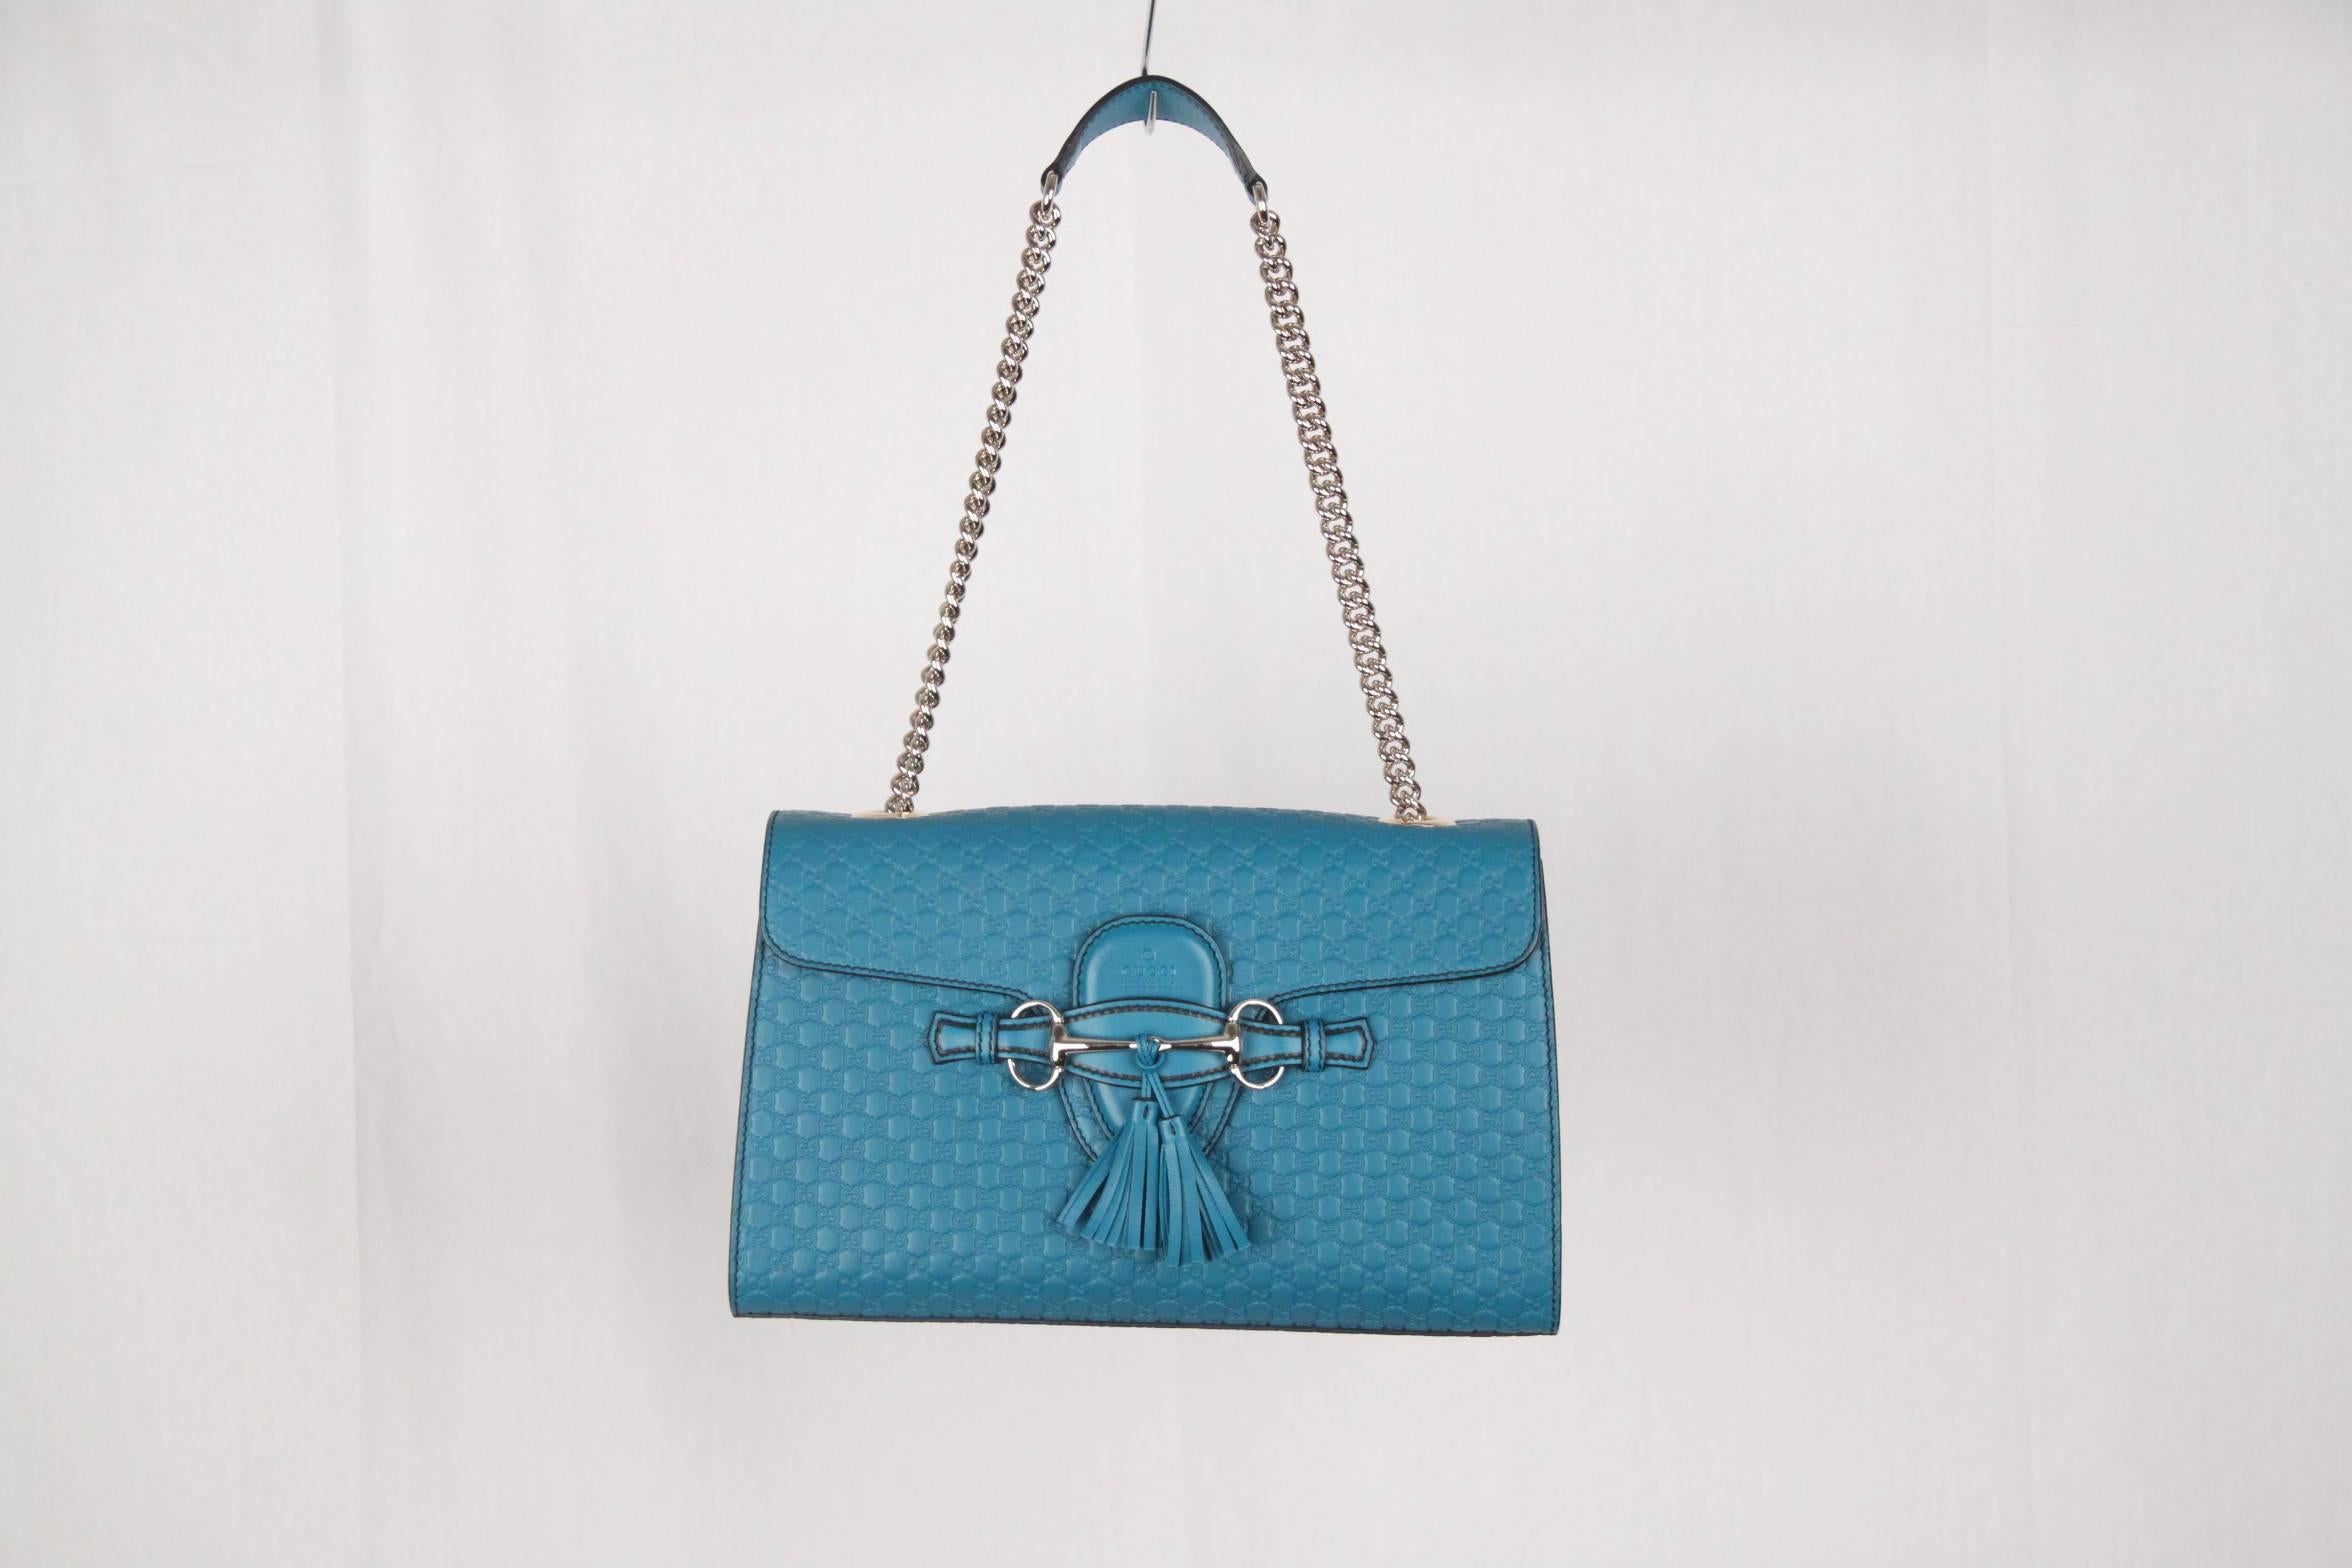 - Turquoise Microguccissima leather Gucci 'Emily' Chain shoulder bag 
- Silver-tone hardware
- Chain-link shoulder strap
- Horsebit & Tassels detail at front
- Ivory canvas interior lining
- 3 slit pockets at interior walls 
- Fold-in flap